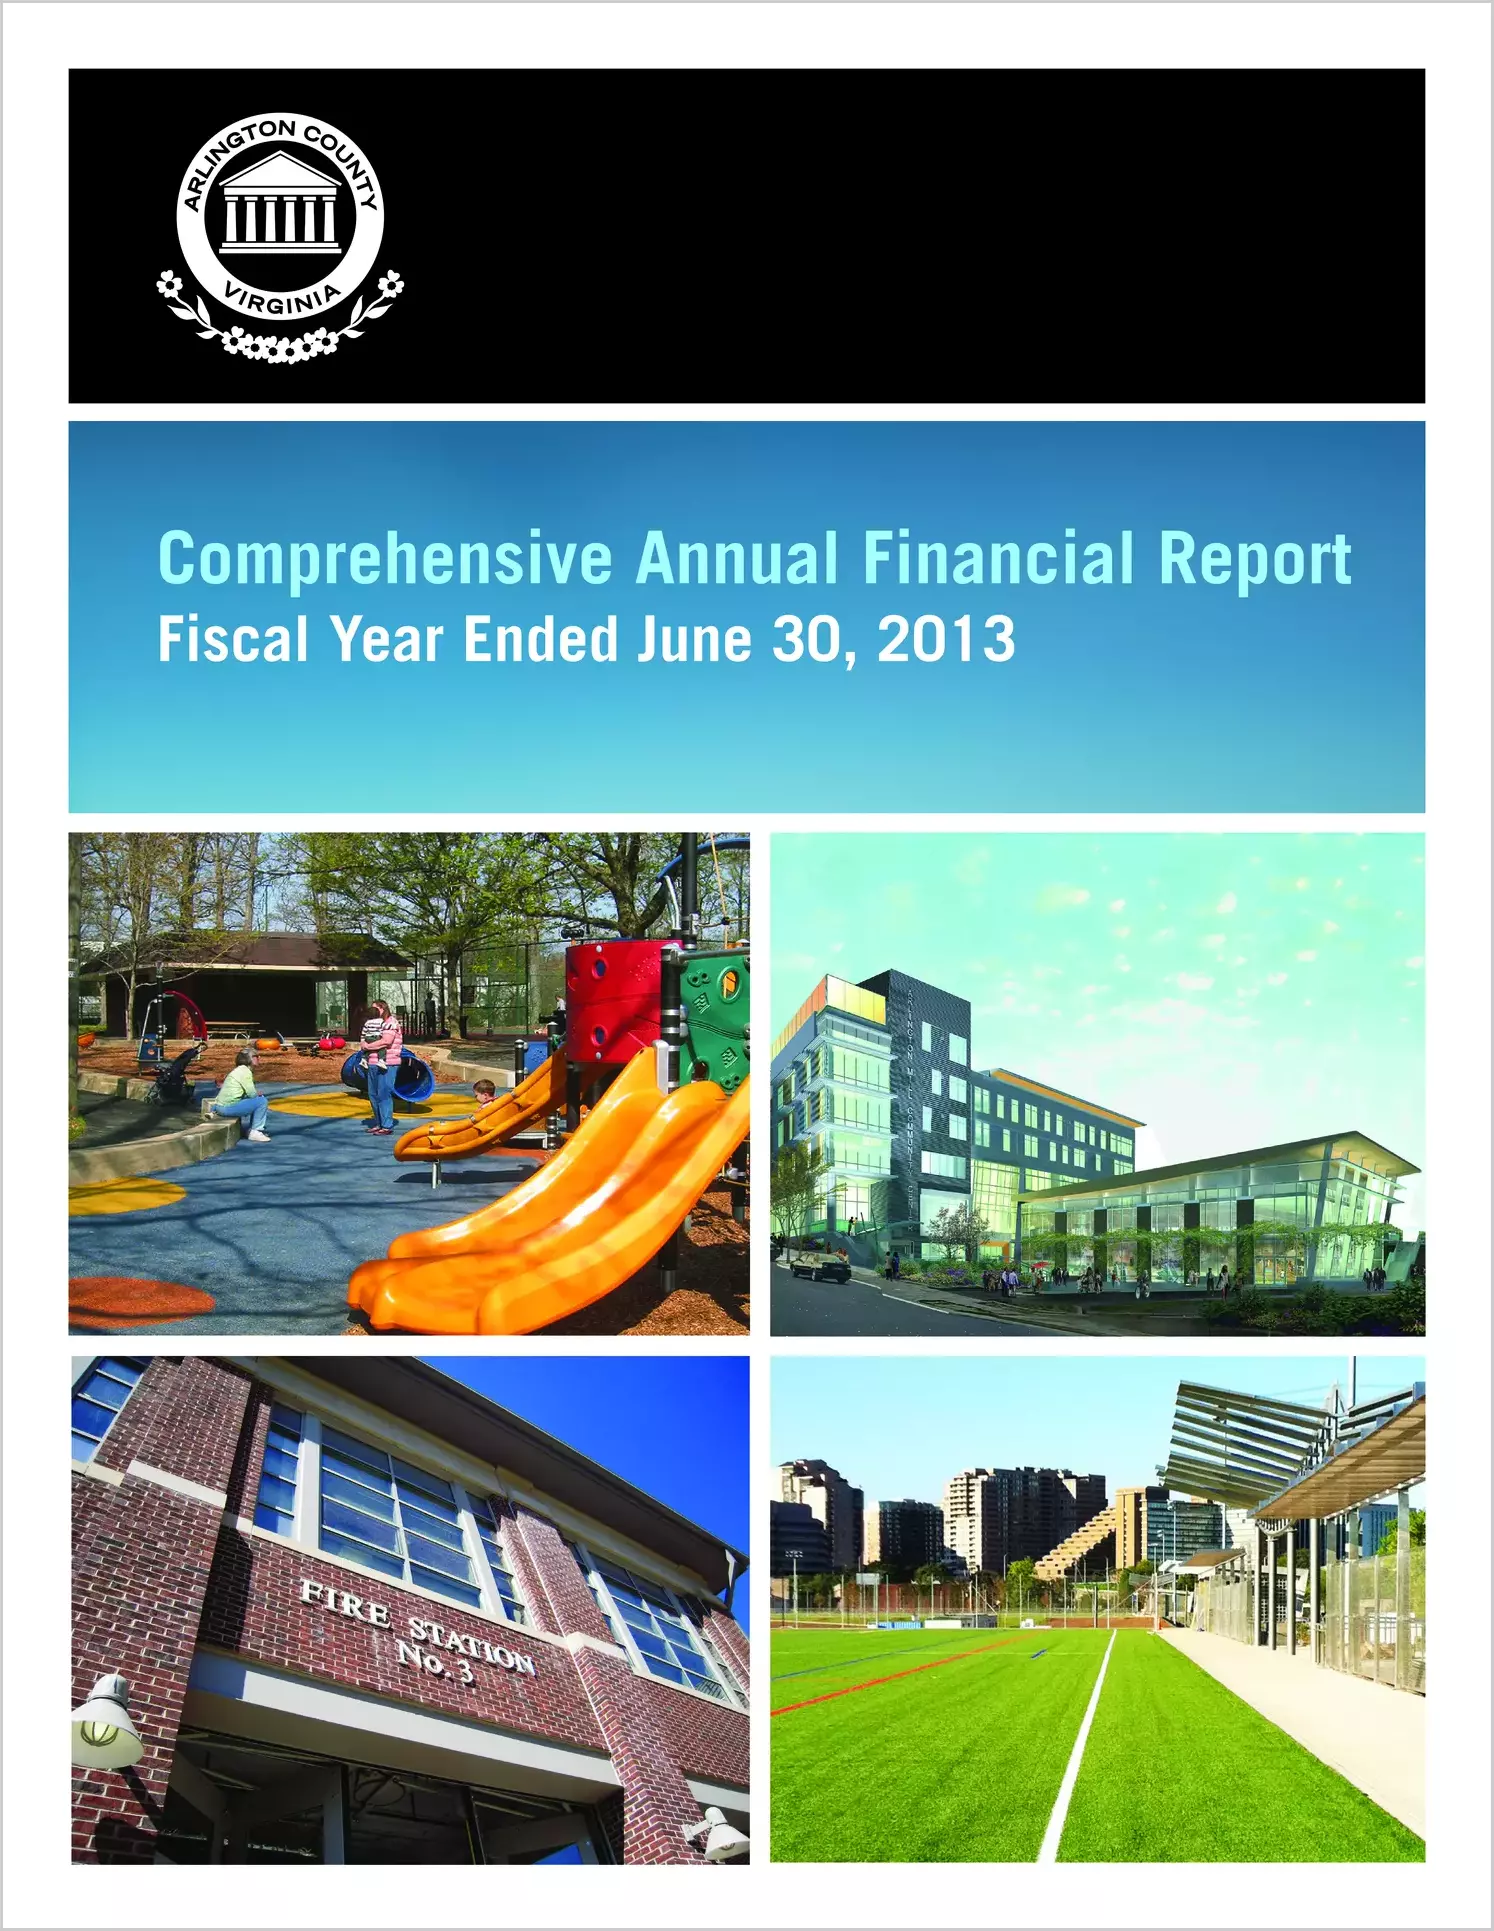 2013 Annual Financial Report for County of Arlington